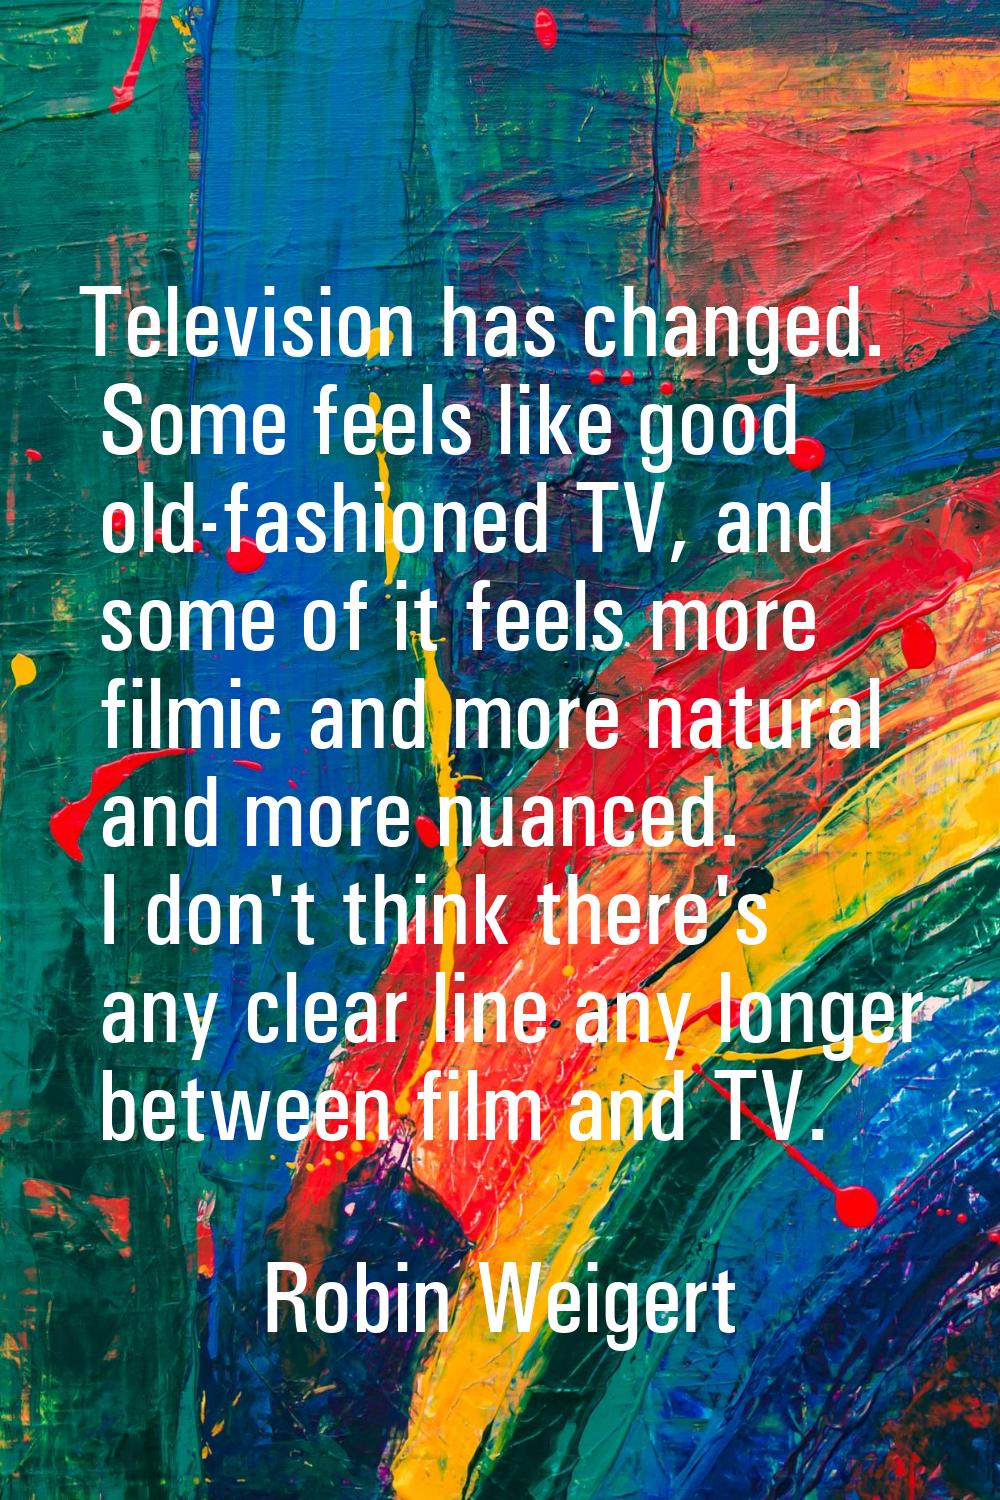 Television has changed. Some feels like good old-fashioned TV, and some of it feels more filmic and